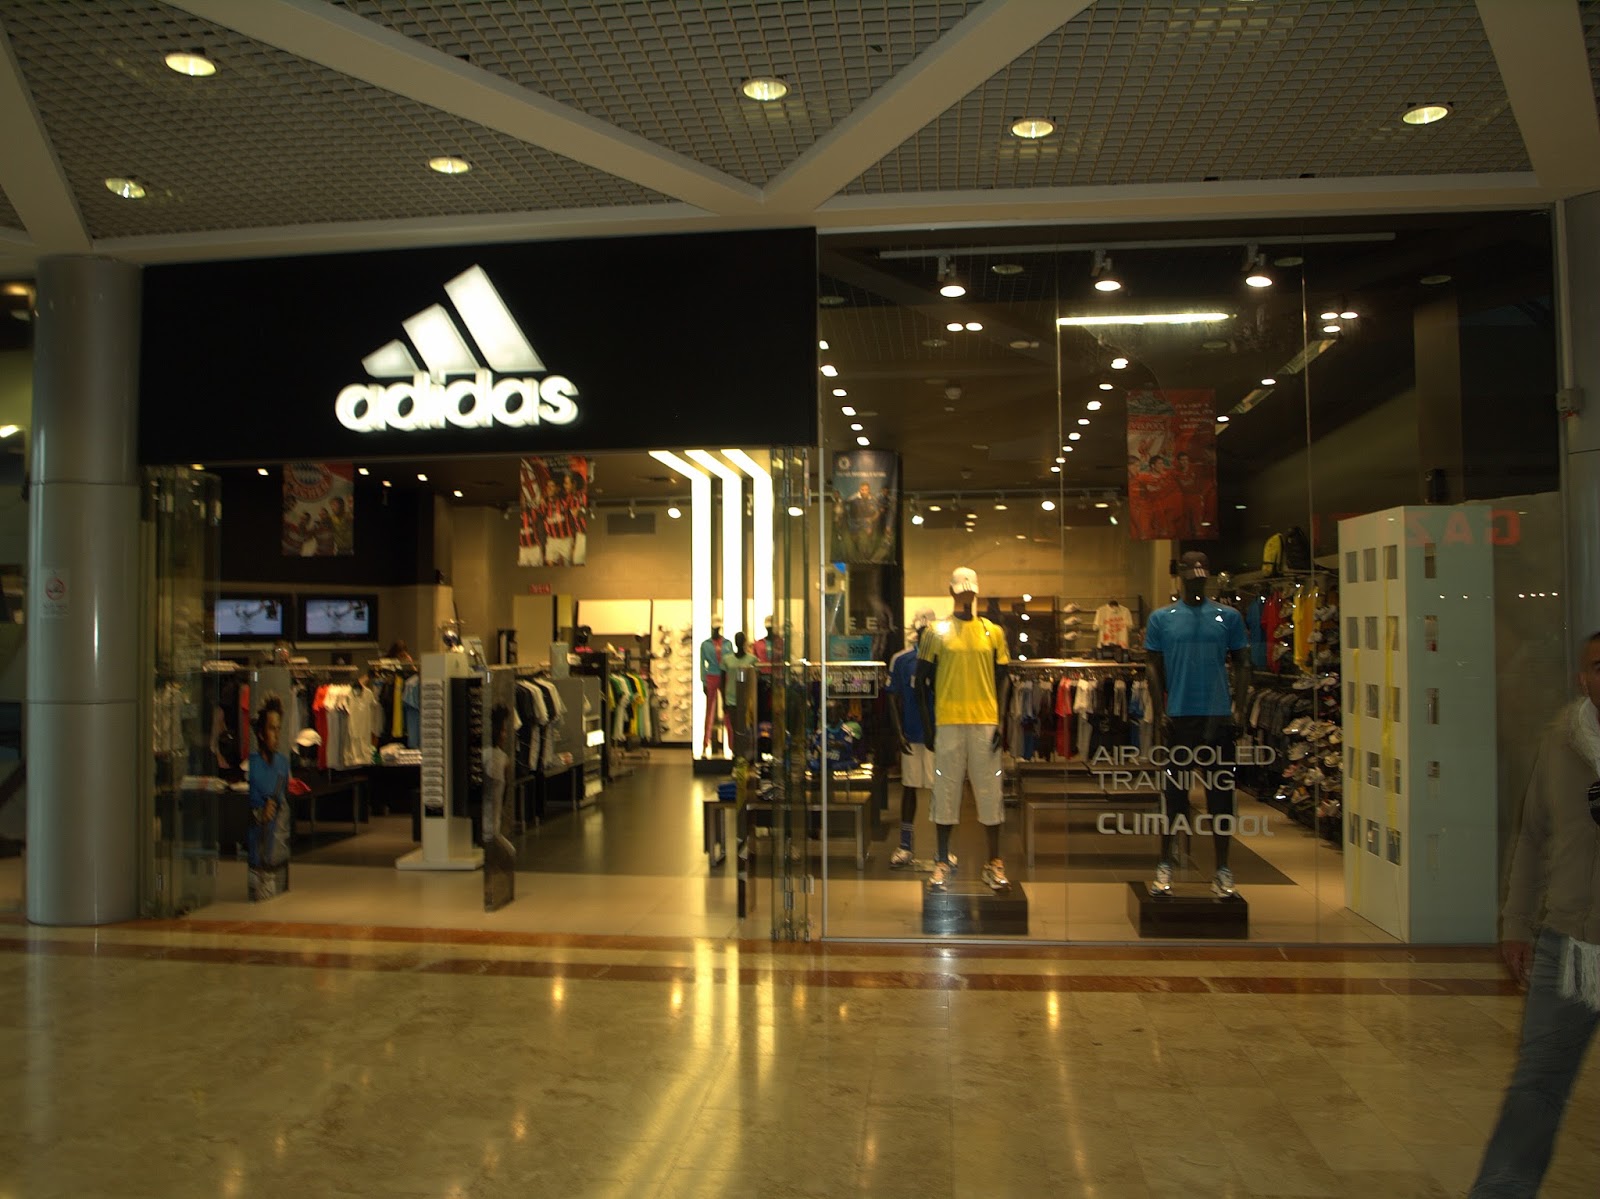 adidas barberino outlet